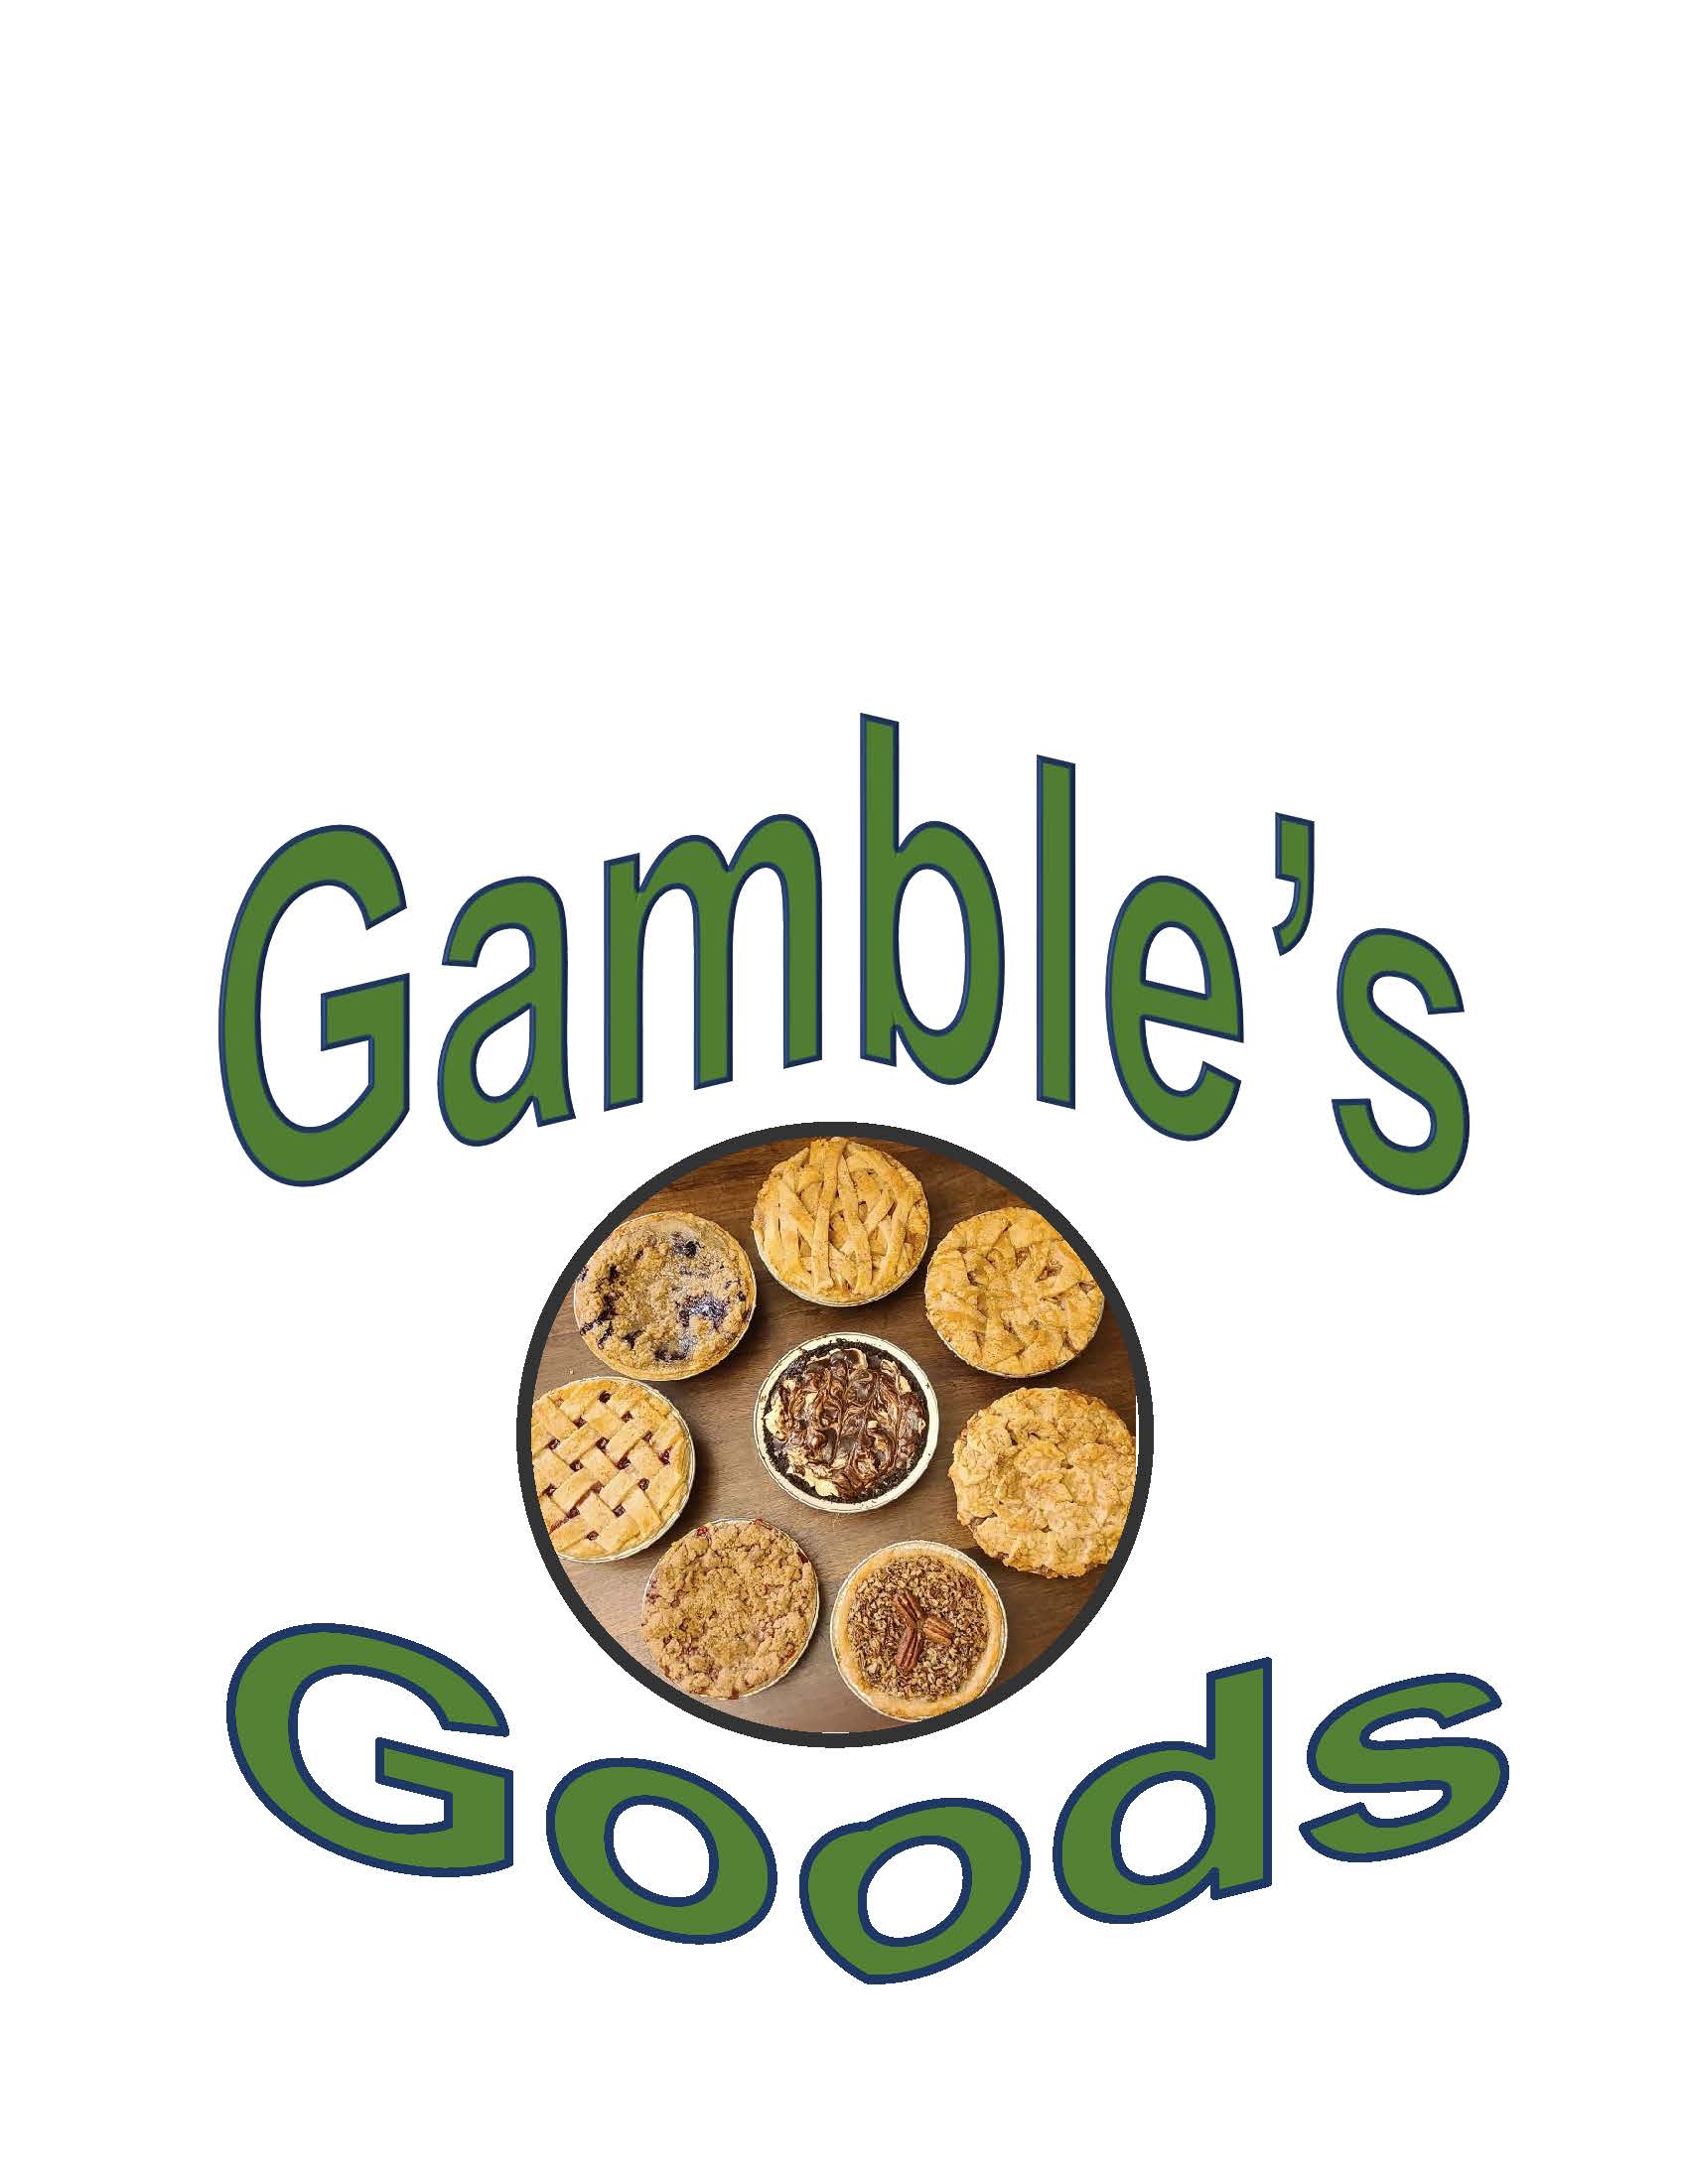 Gamble's Goods surrounding a picture of various pies.